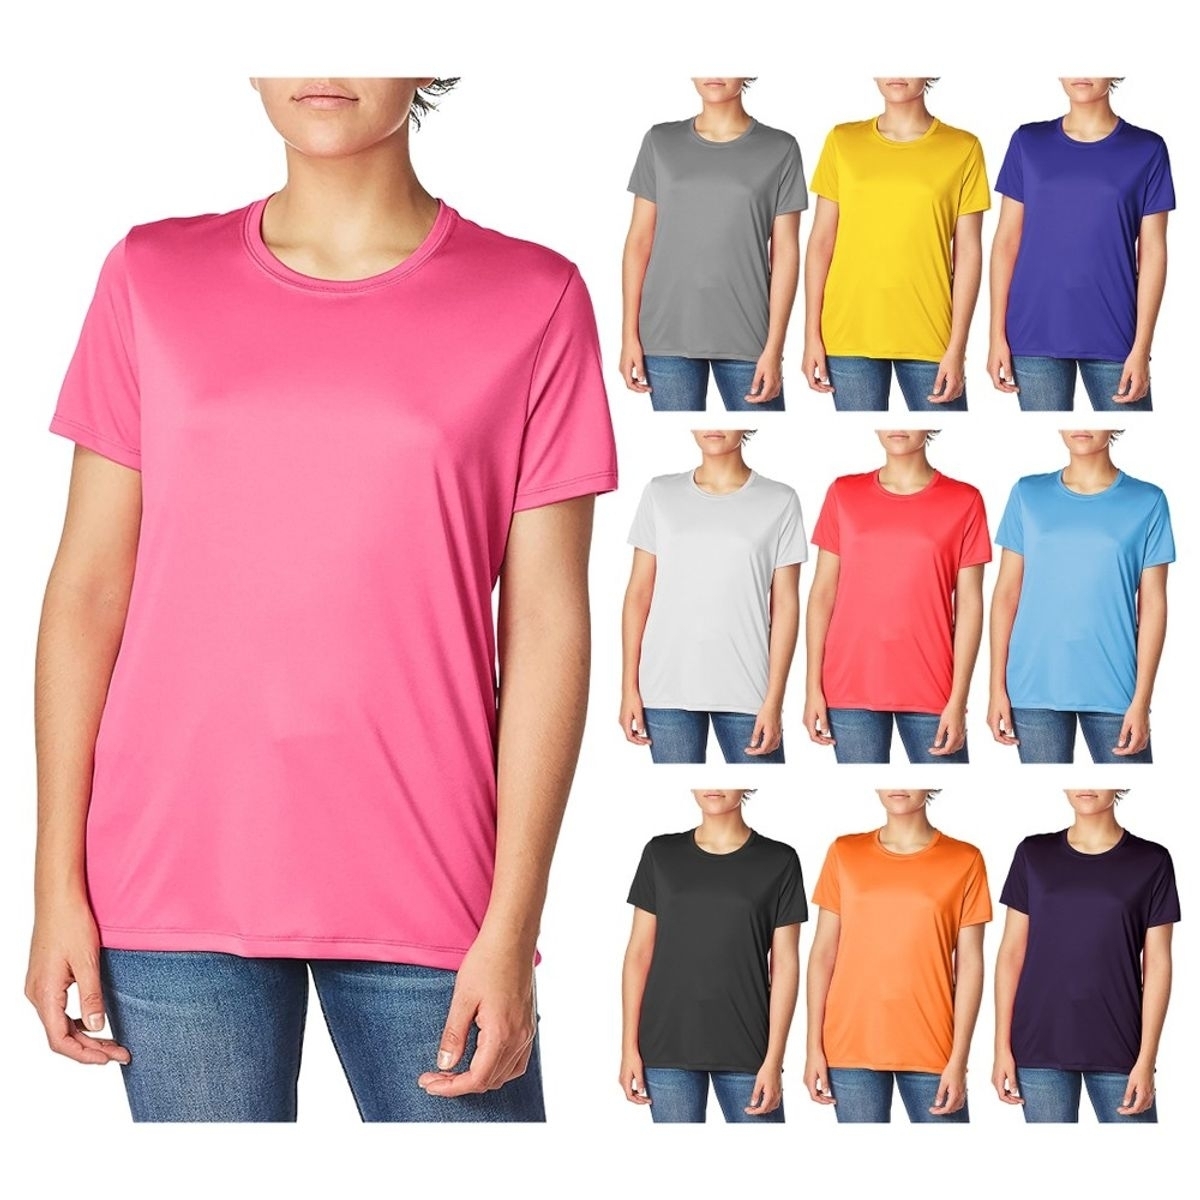 5-Pack: Women's Cool Dri-FIt Moisture Wicking Sim-Fit Long Sleeve Crew Neck T-Shirts - X-large